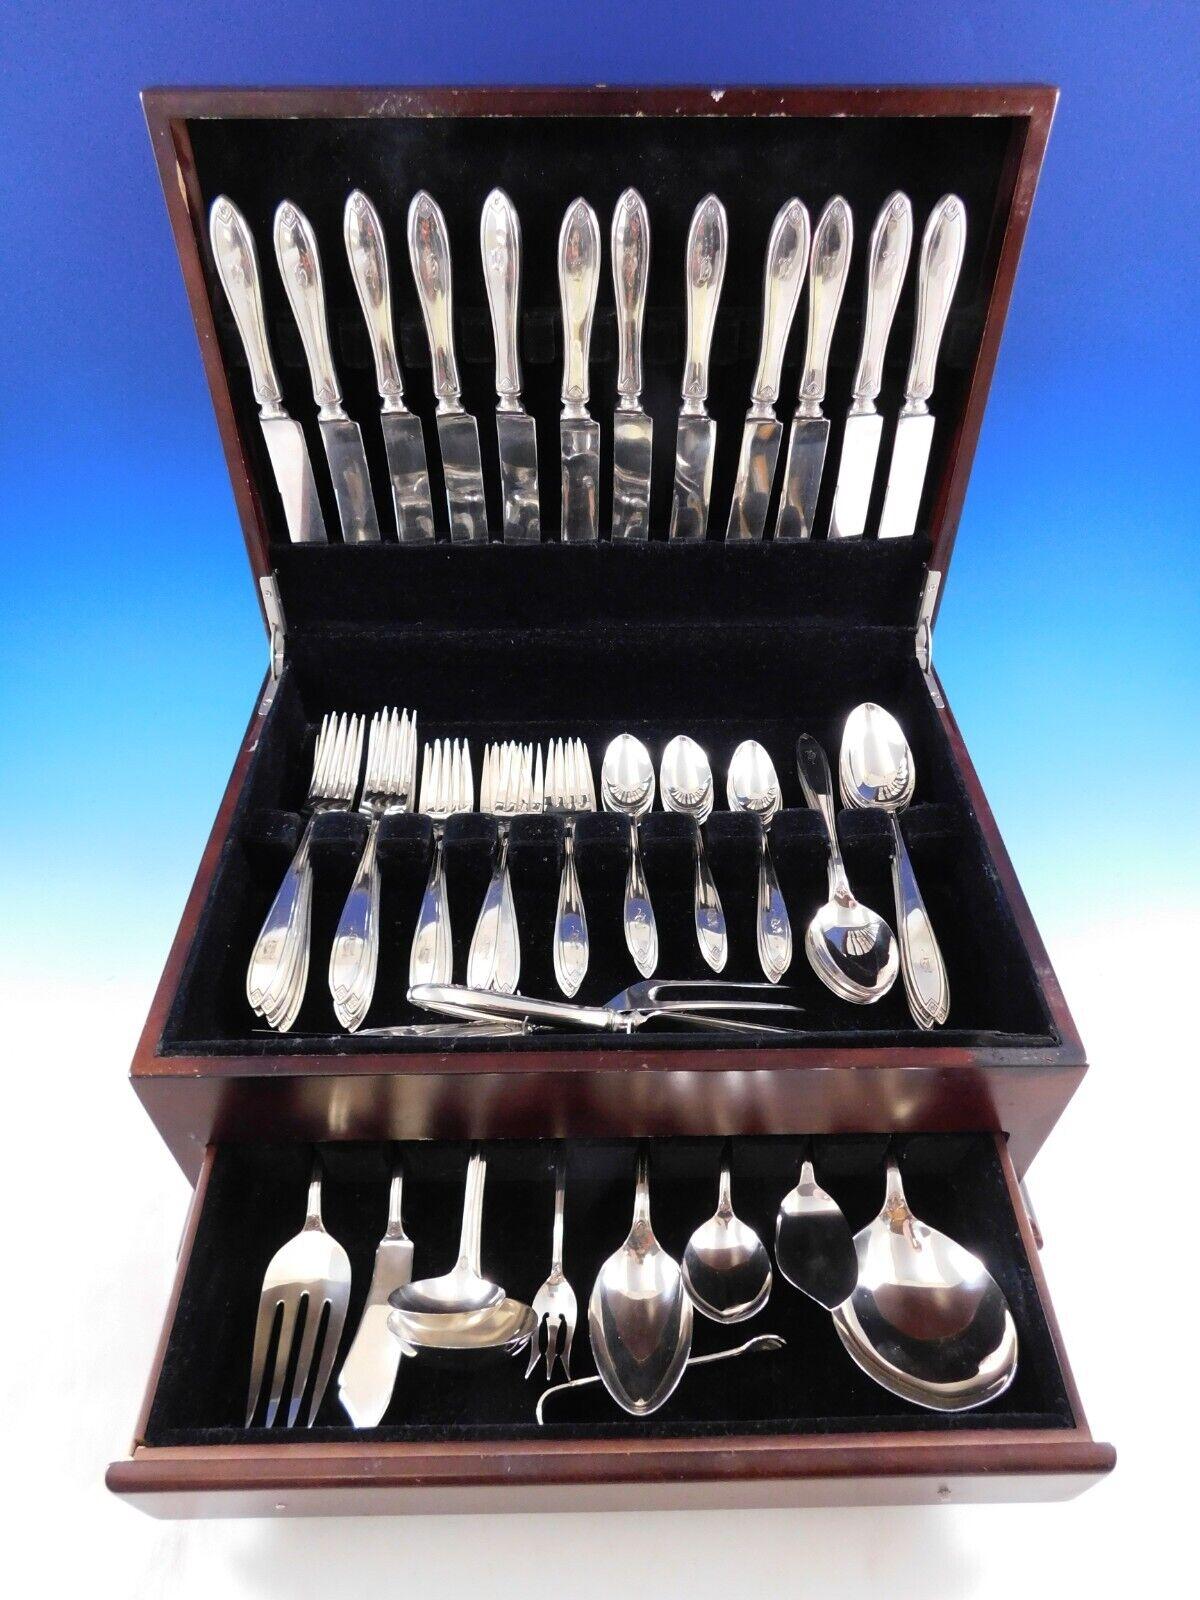 Fiesta by Hallmark sterling silver Dinner Size Flatware set, 73 pieces. This set includes:

12 Knives, 8 3/4